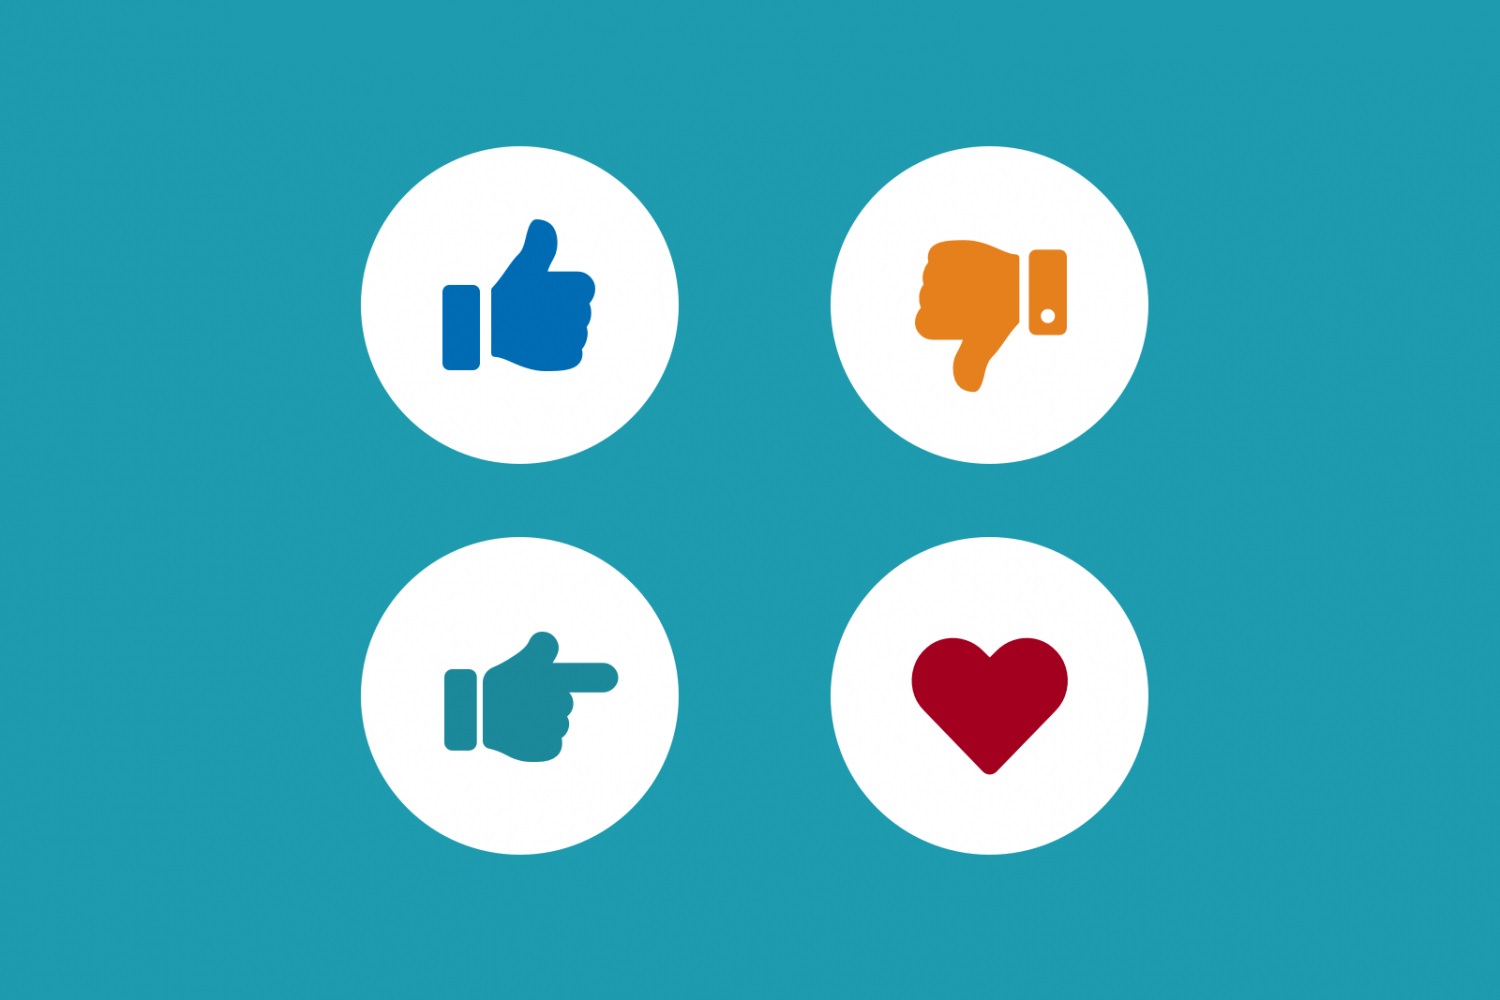 Feedback icons of thumbs up and thumbs down